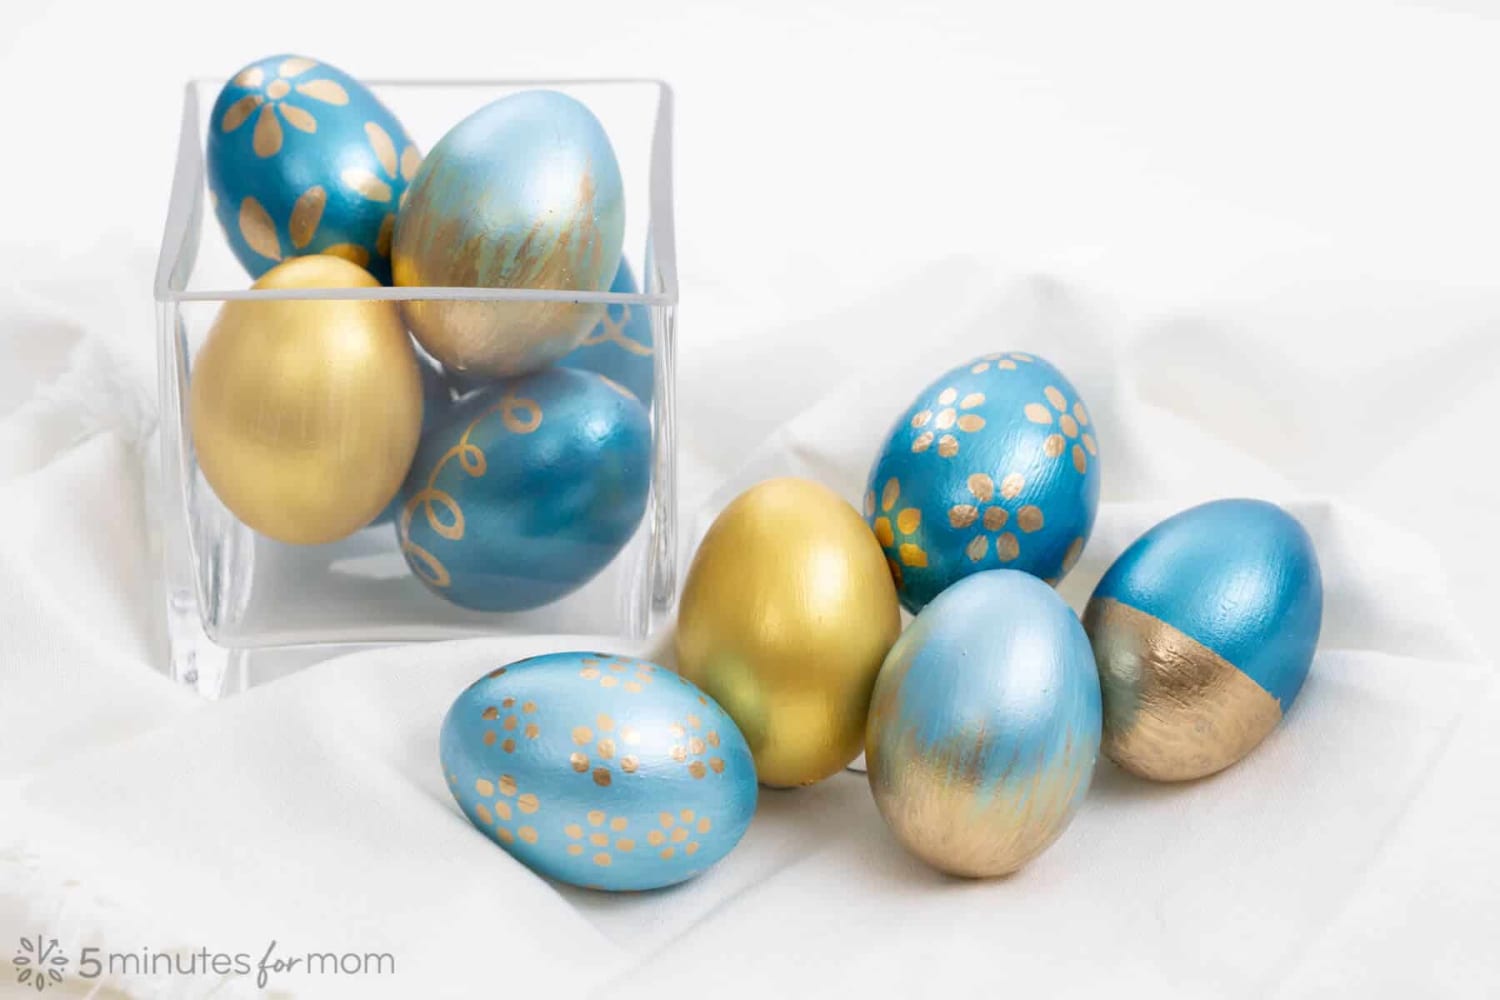 Easter Egg Painting - How to Decorate Easter Eggs with Acrylic Paint and Enamel Paint Pens